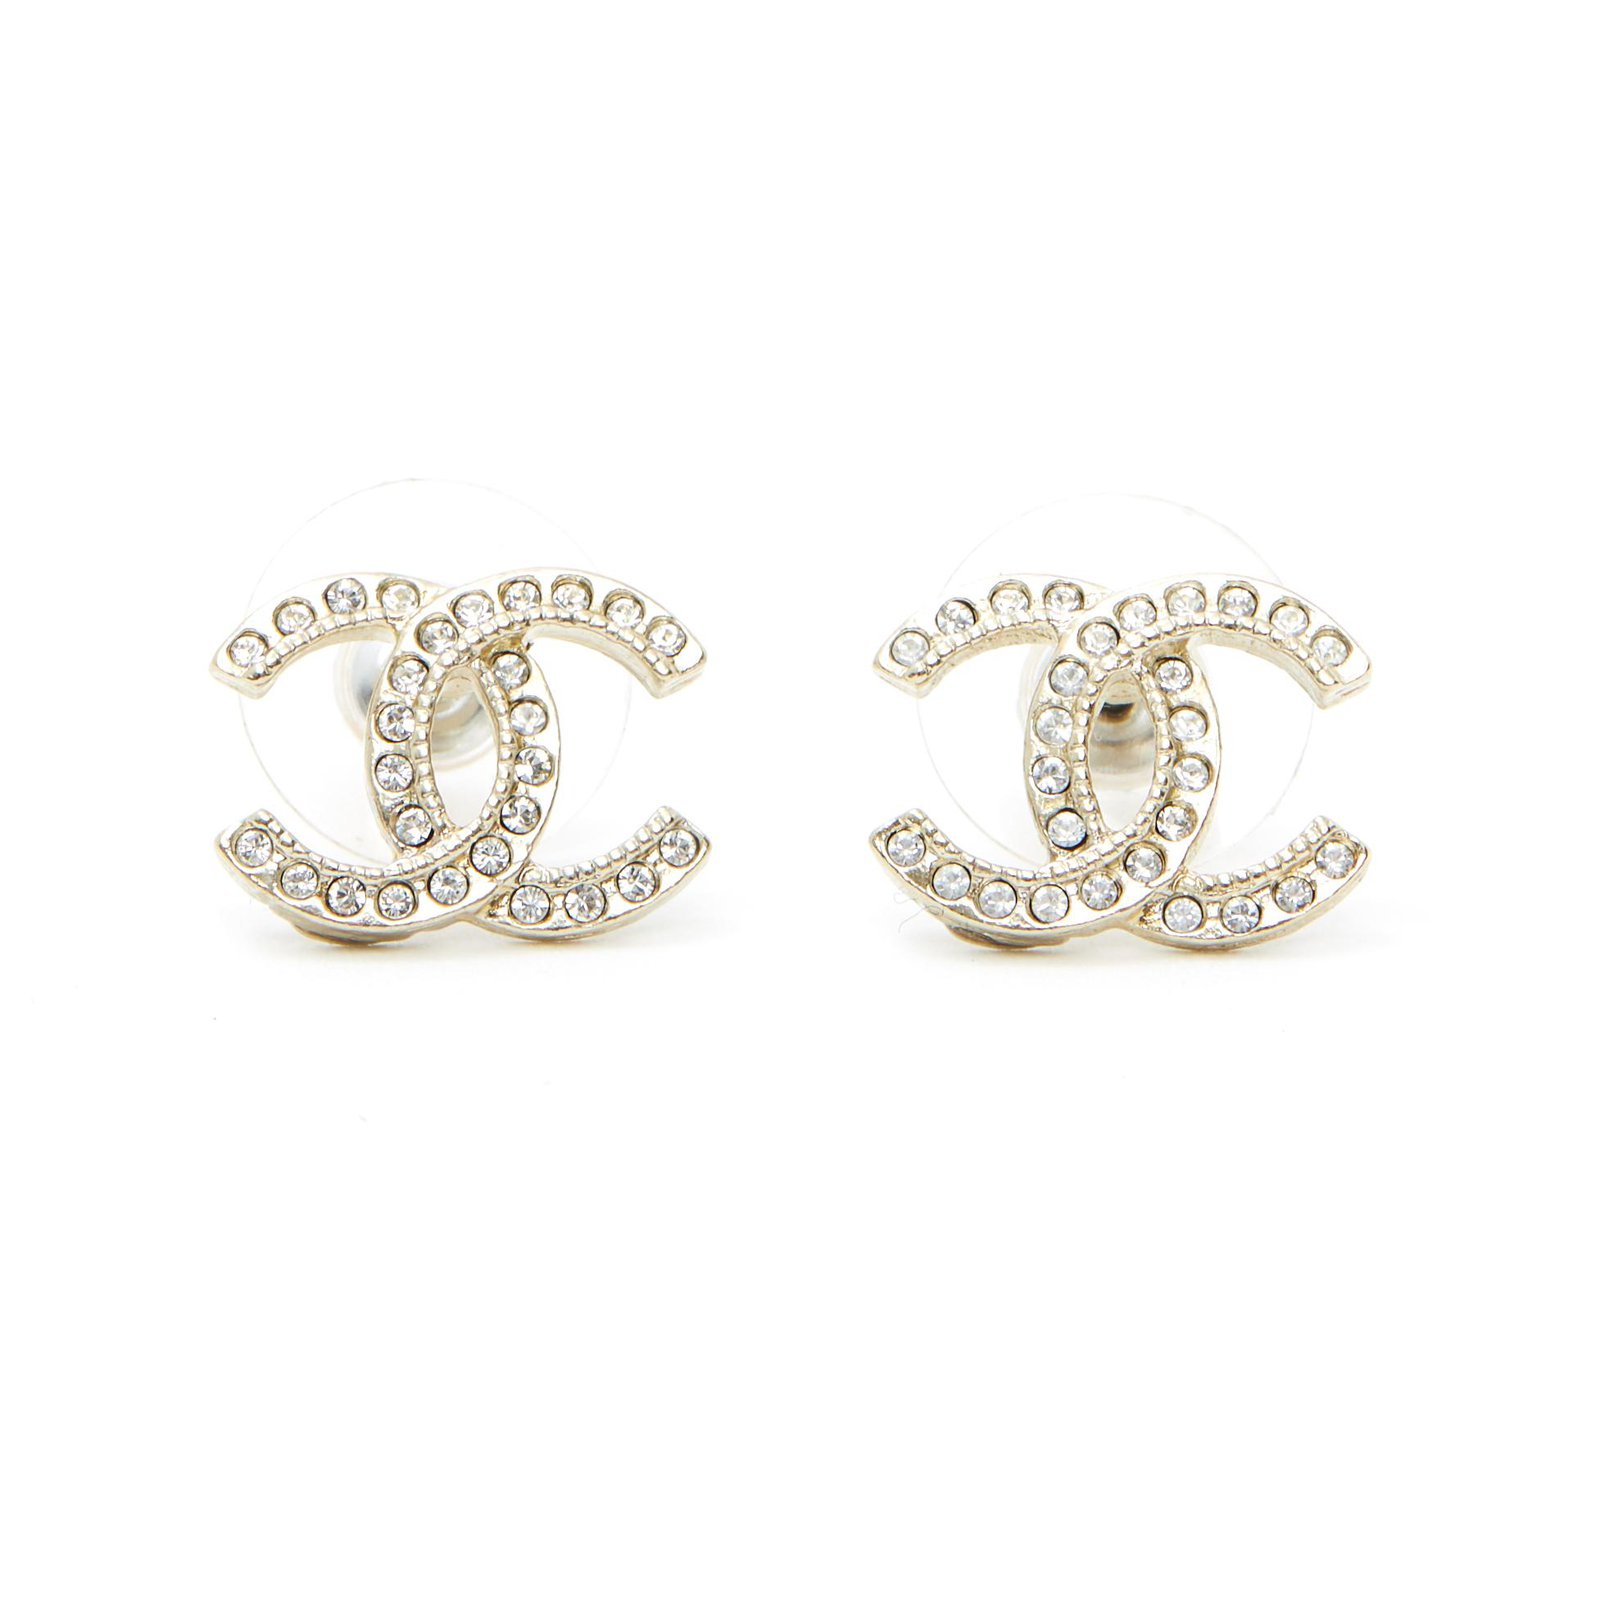 Get the best deals on CHANEL Crystal Gold Fashion Earrings when you shop  the largest online selection at . Free shipping on many items, Browse your favorite brands